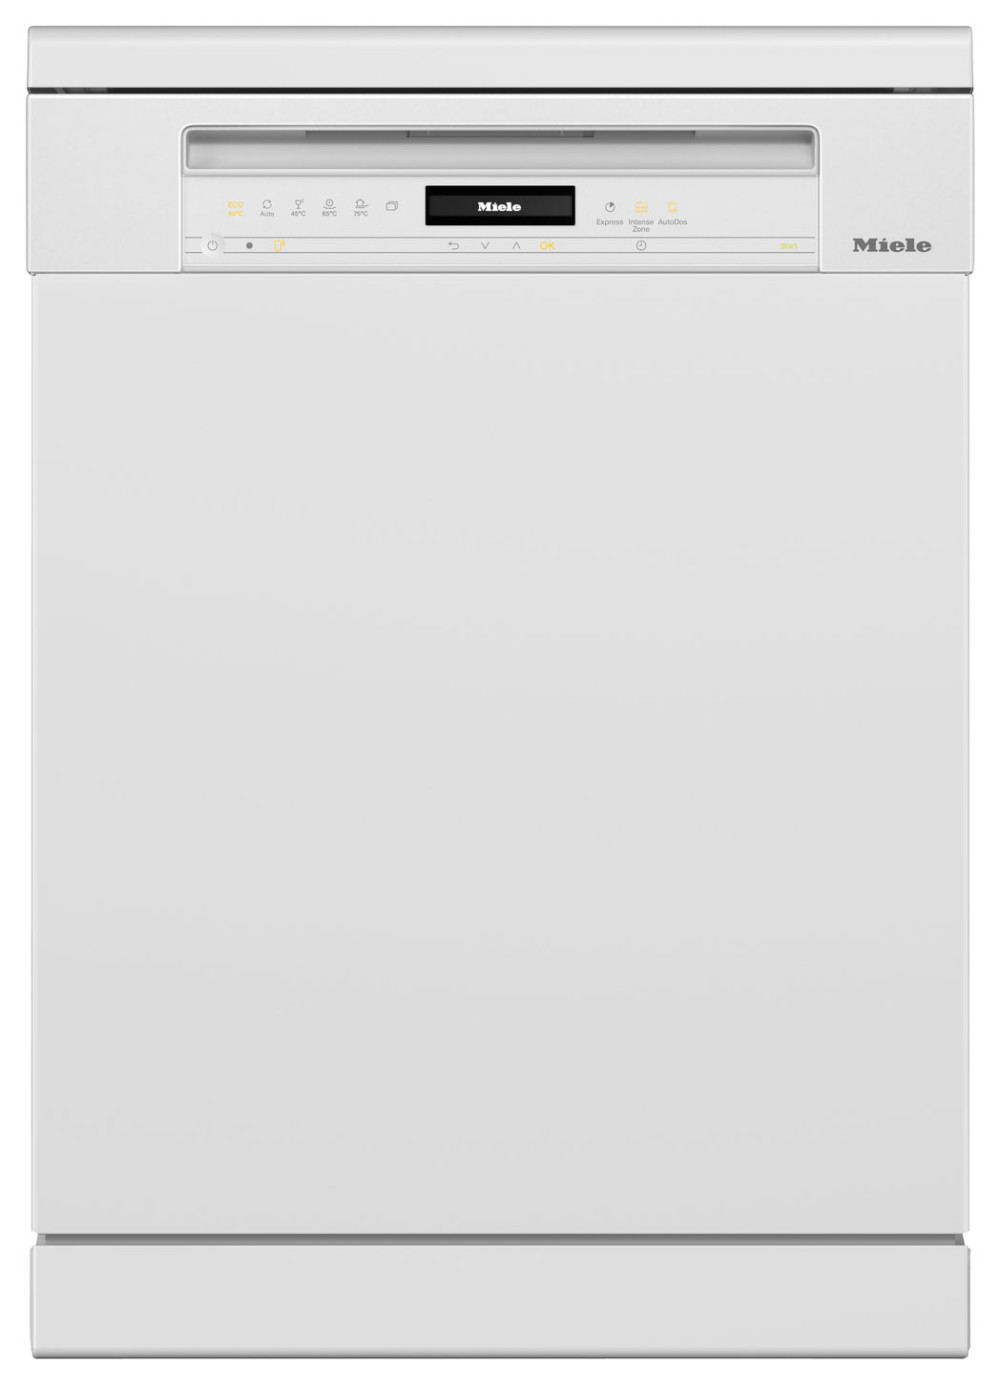 Miele G 7410 SC brws Dishwasher featured image